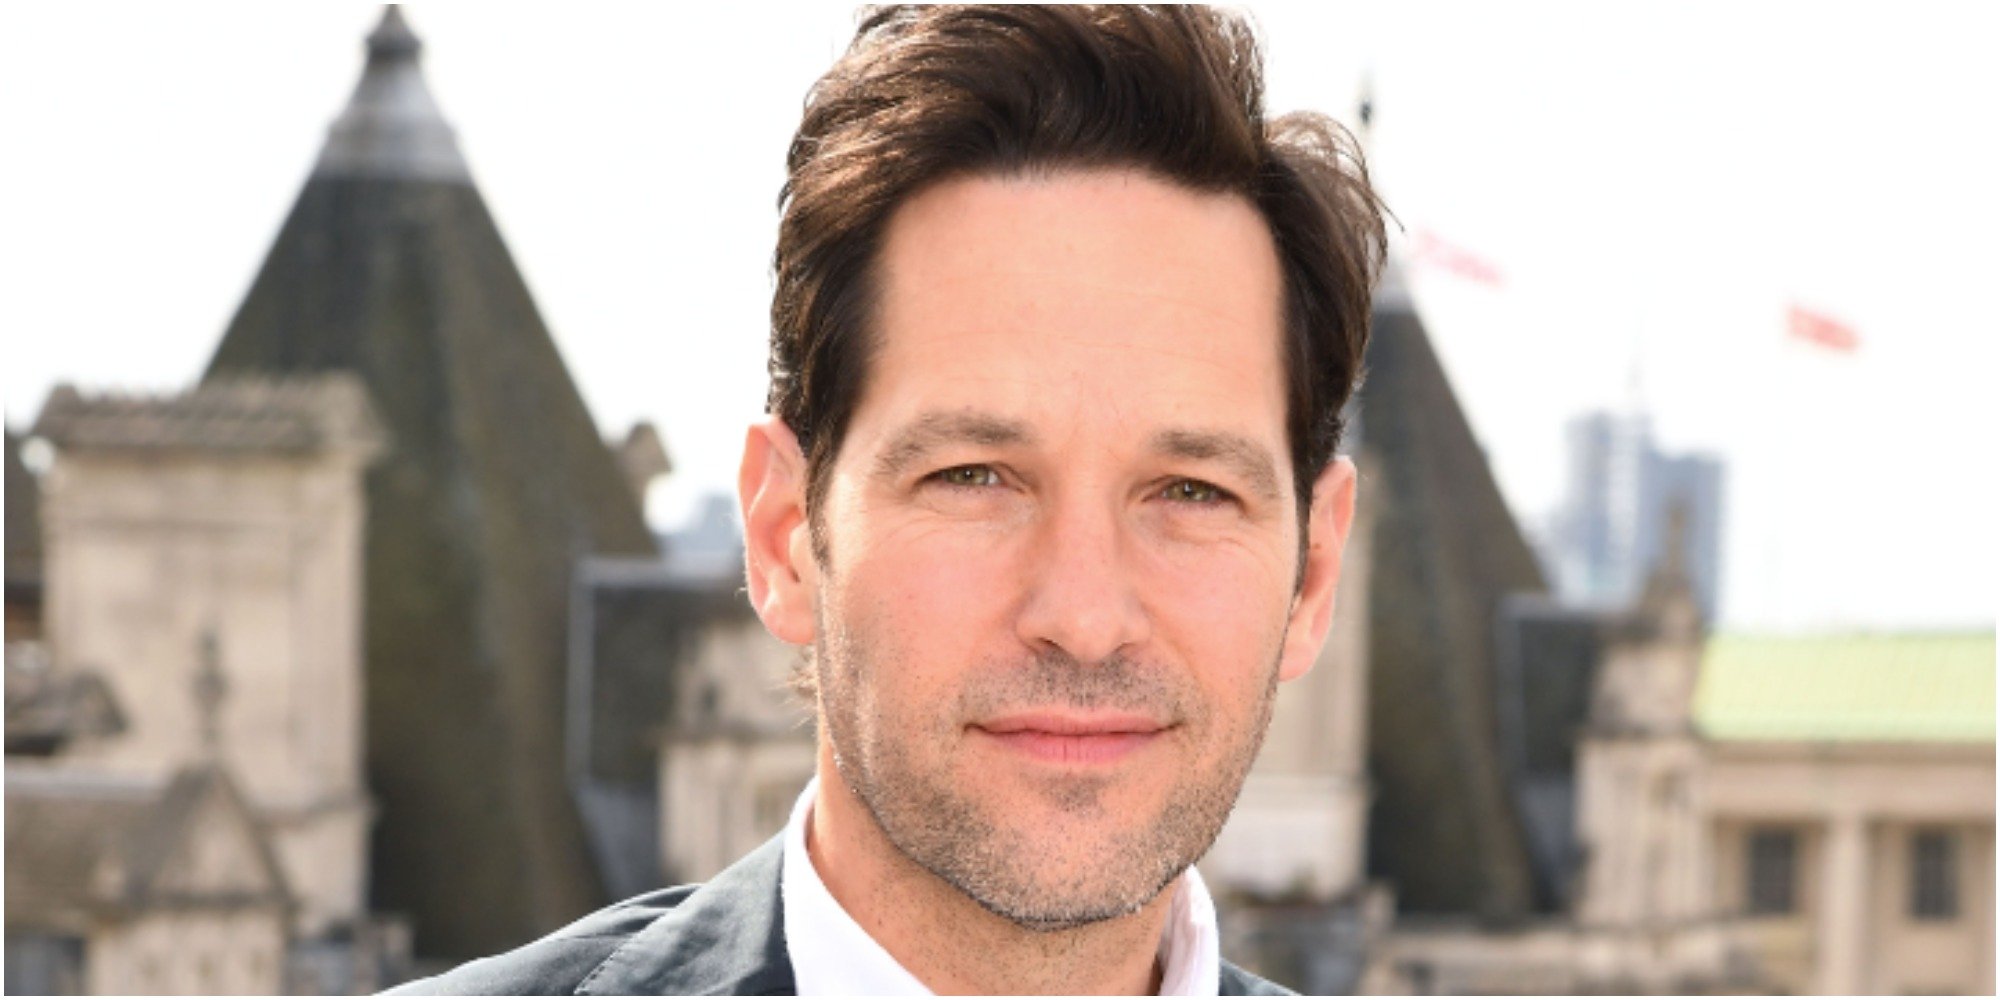 Paul Rudd wears a suit as he poses for photographers.